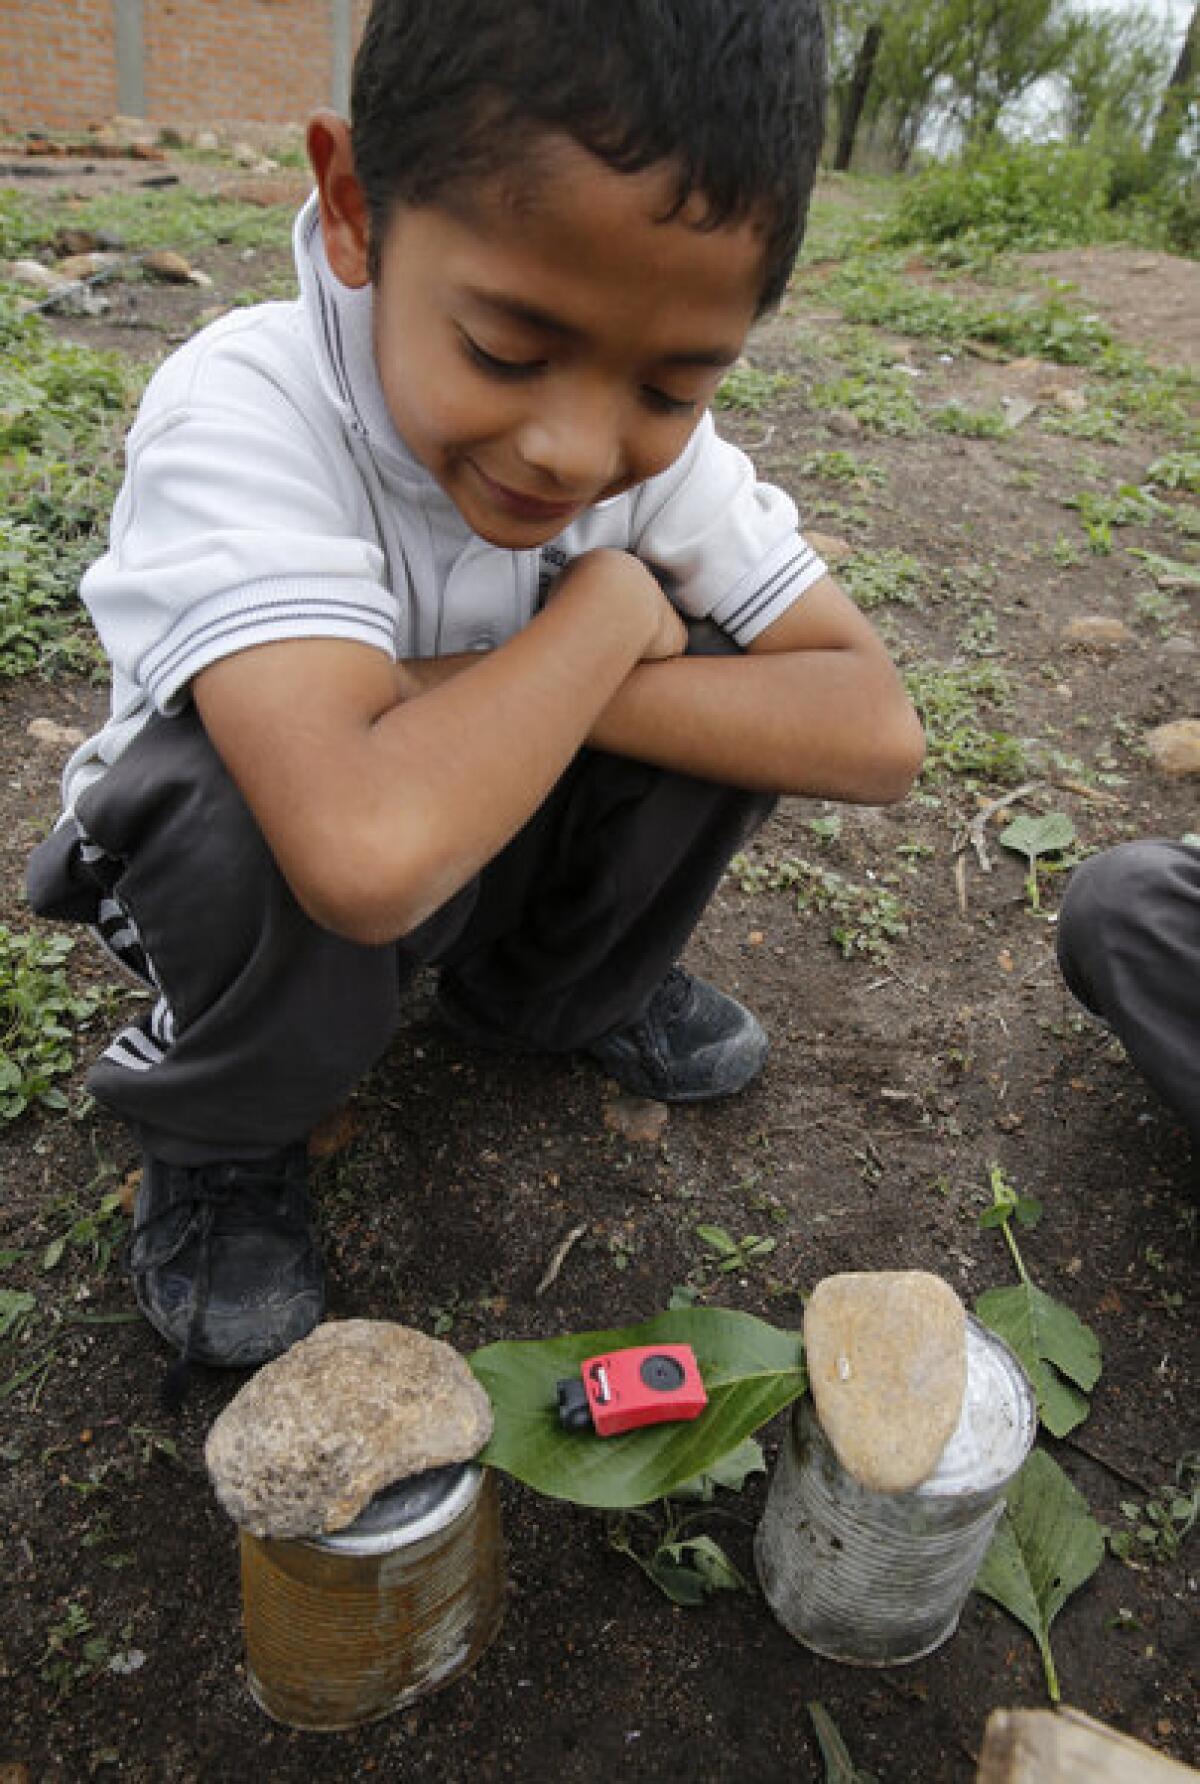 Marcos Ireta admires the tiny green leaf hammock he crafted with rusty cans and rocks outside his house near Irapuato, Mexico. With little money available for ready-made toys, he and his five siblings make do with imaginary games and toys.